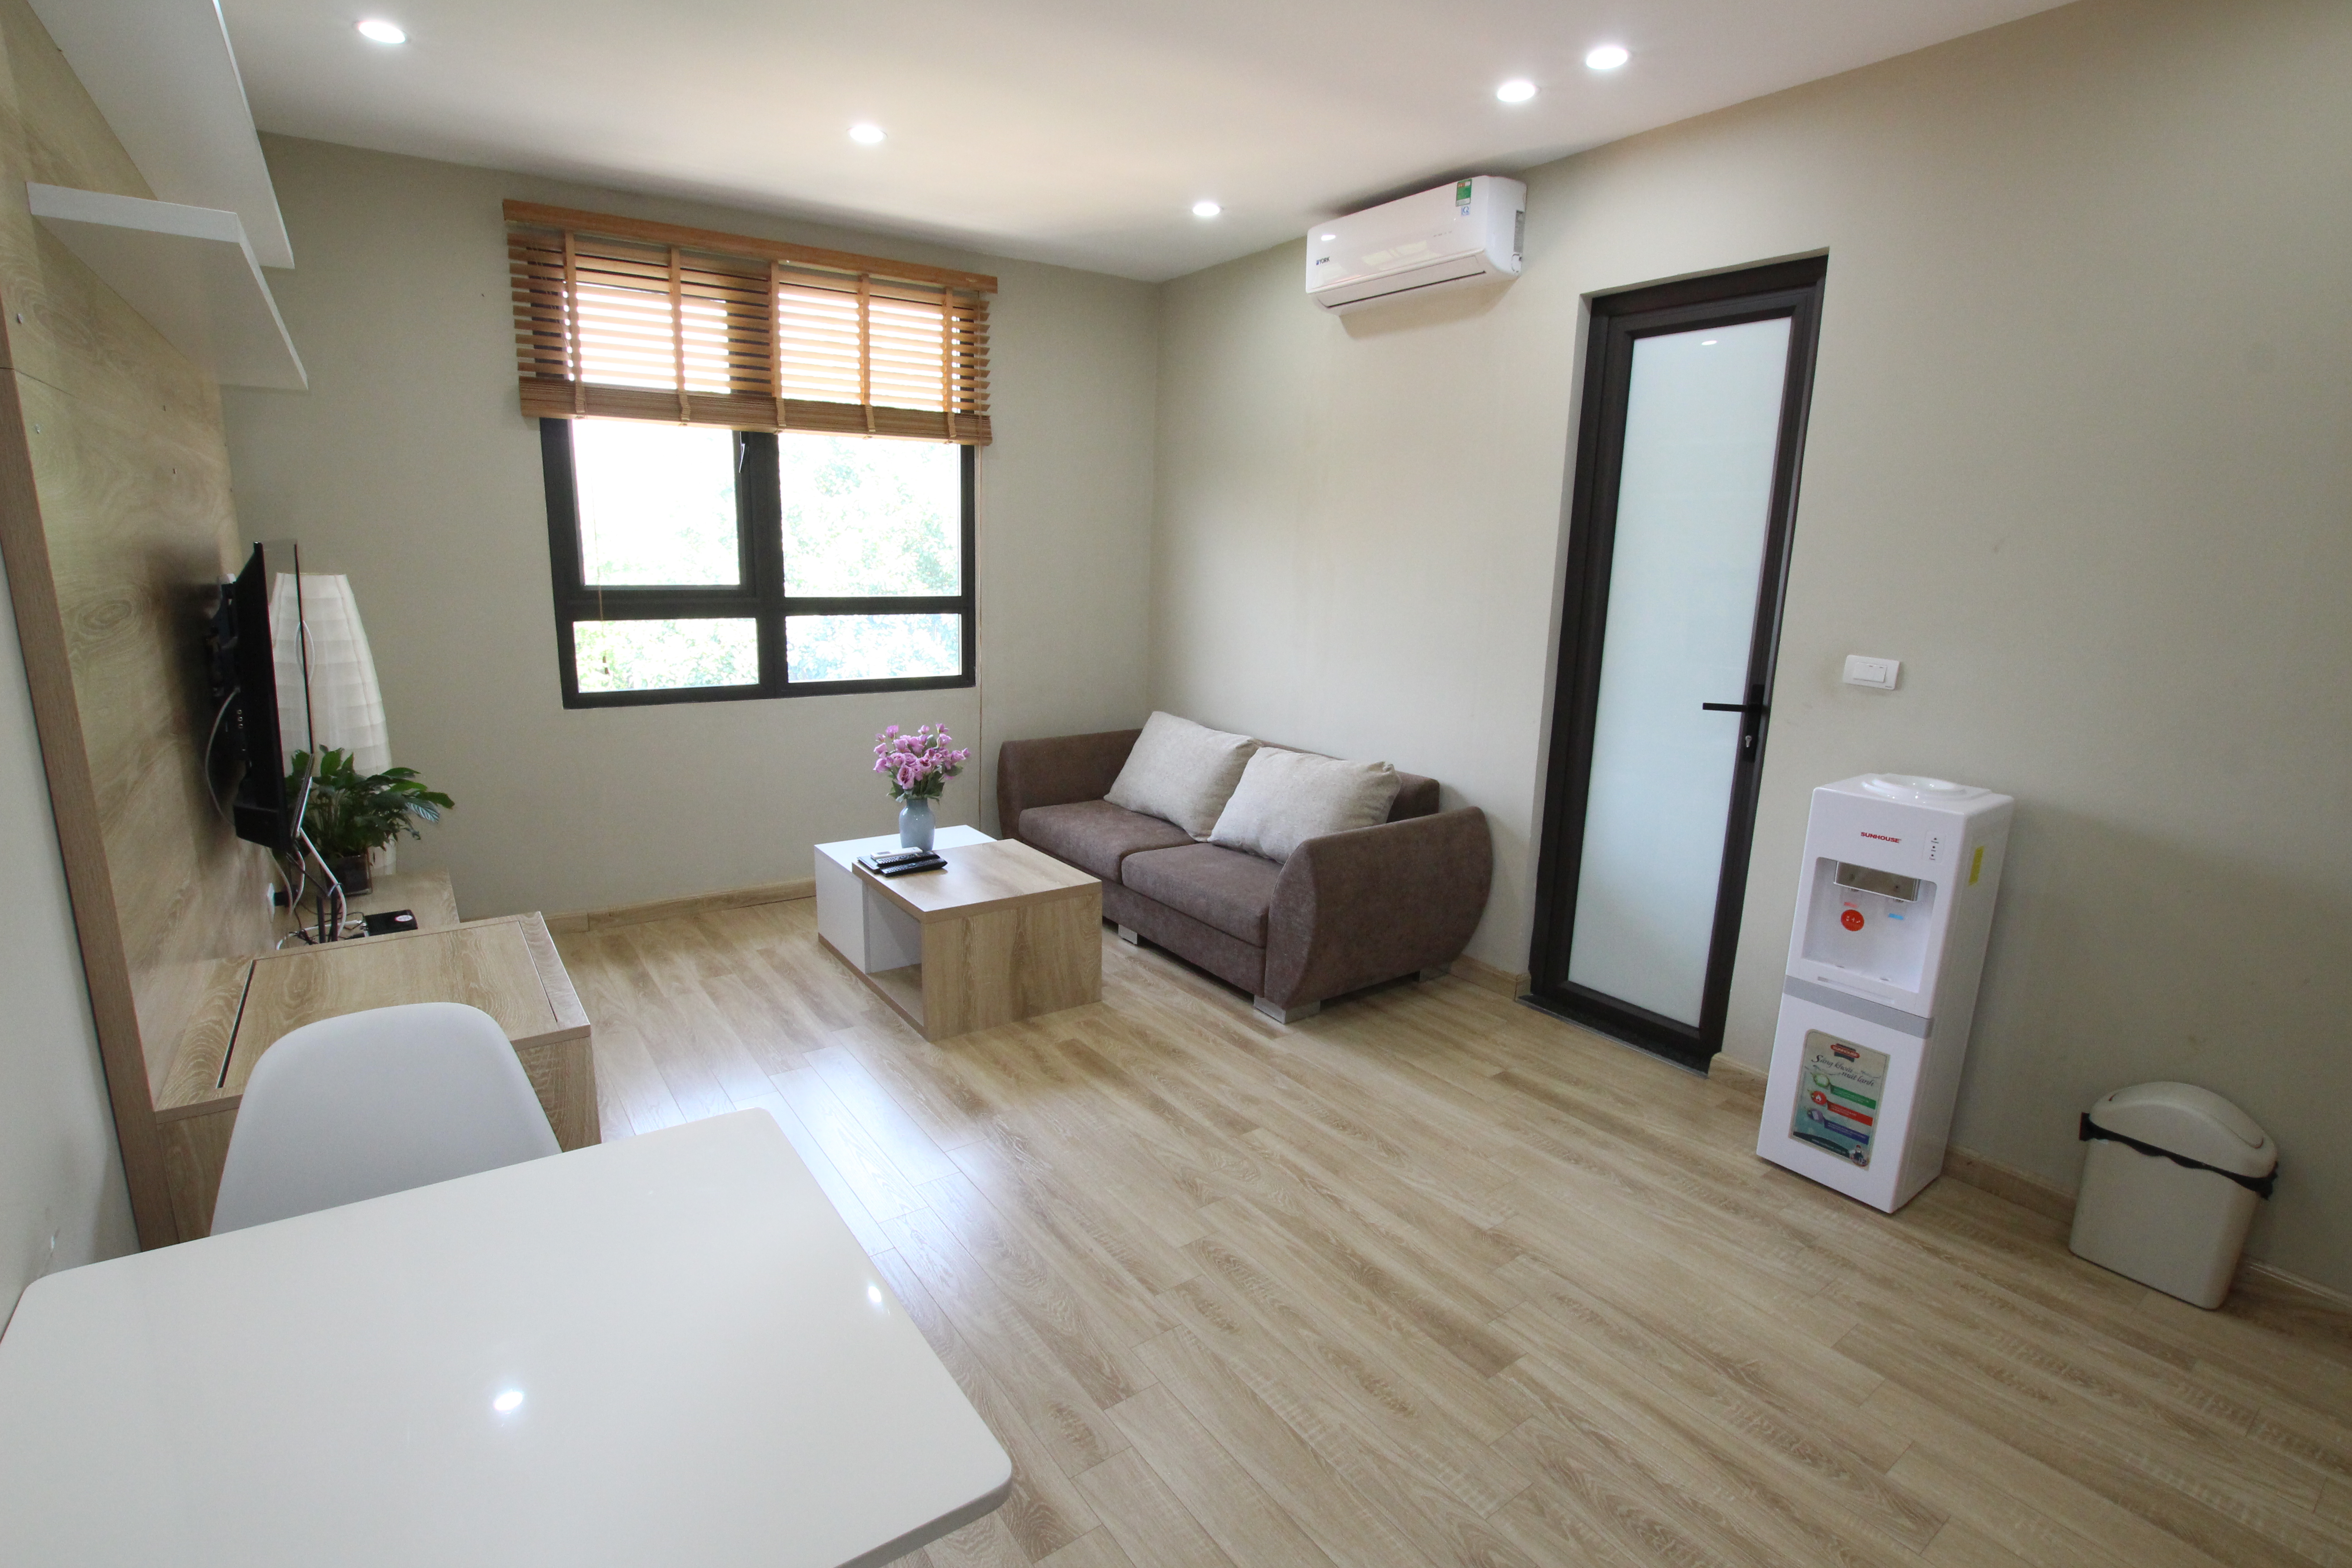 Nicely Furnished Serviced Apartment Rental in Trich Sai Street, Tay Ho, Modern Amenities